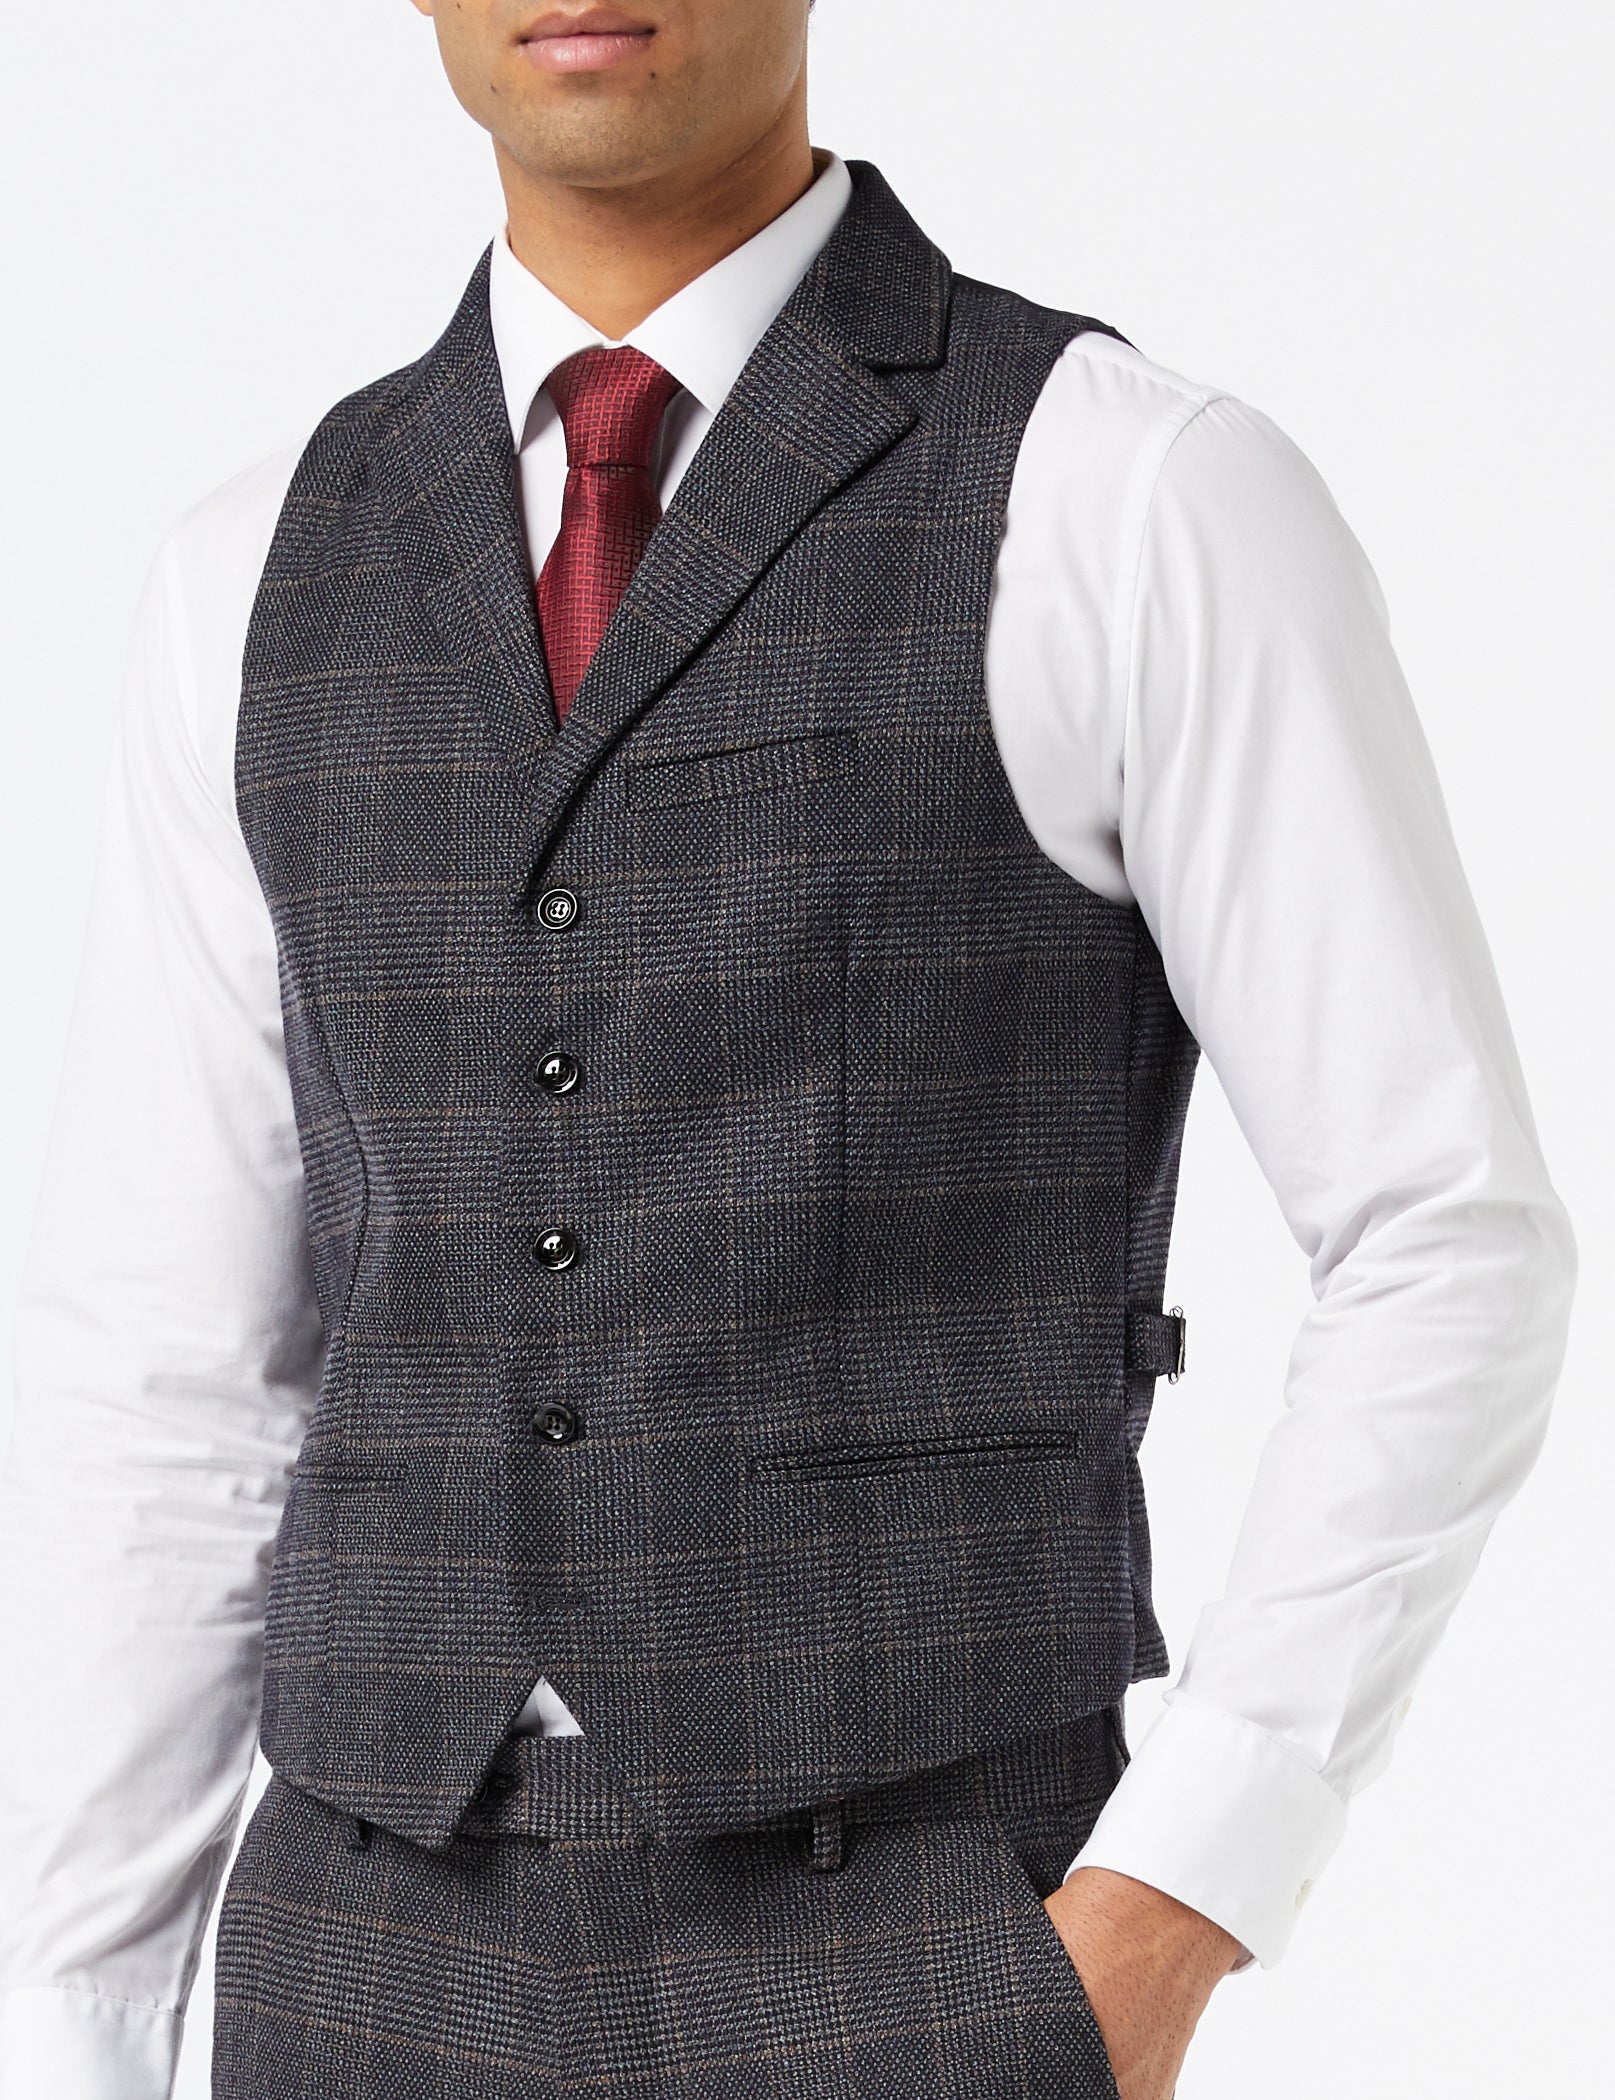 ETHAN - GREY TWEED CHECK SUIT